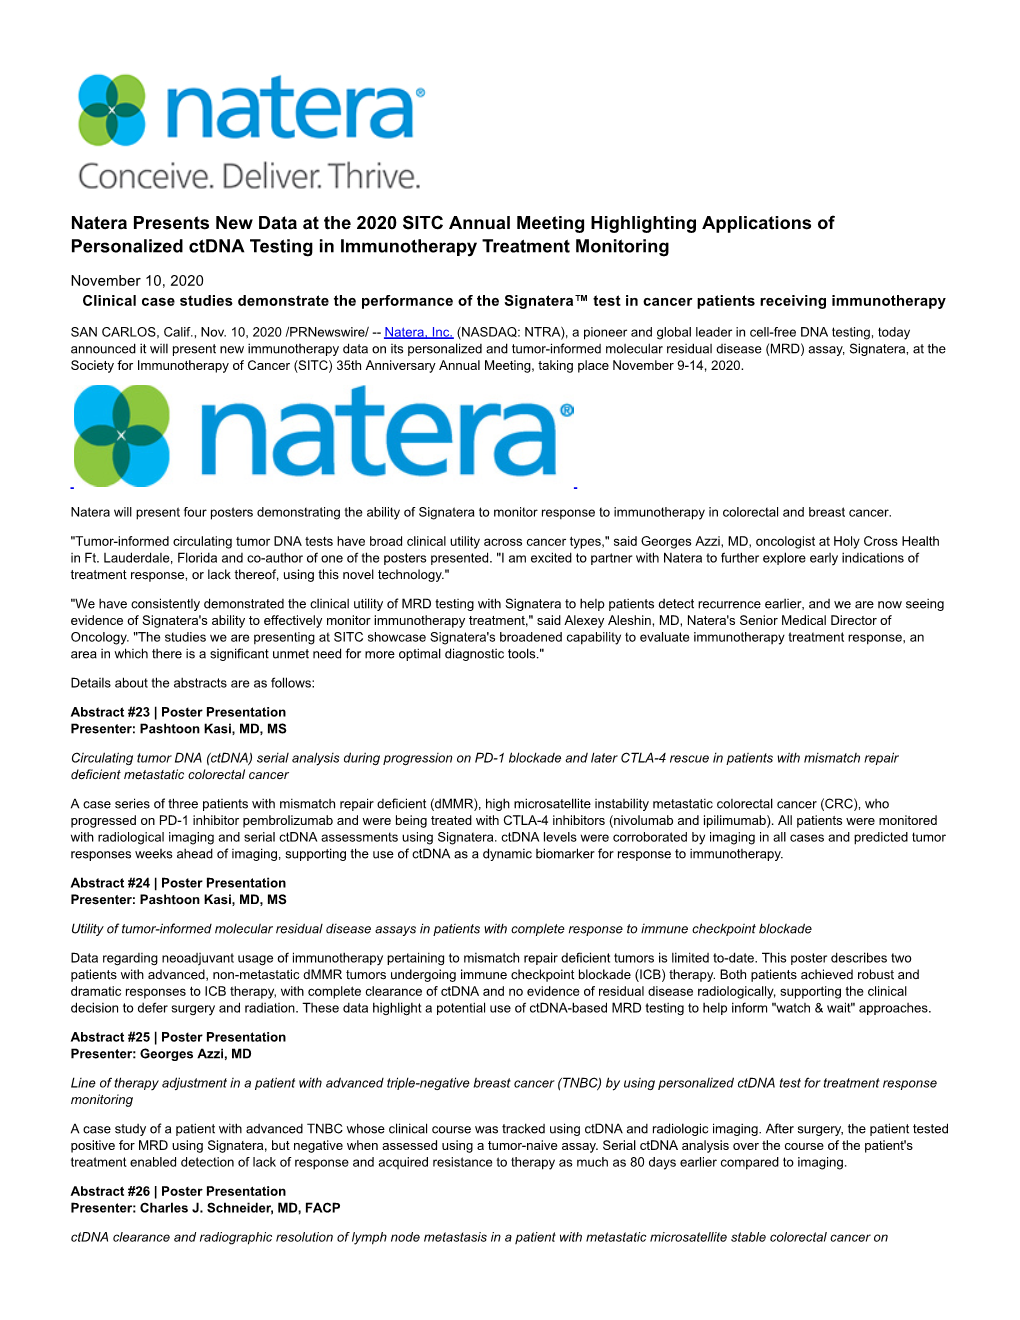 Natera Presents New Data at the 2020 SITC Annual Meeting Highlighting Applications of Personalized Ctdna Testing in Immunotherapy Treatment Monitoring